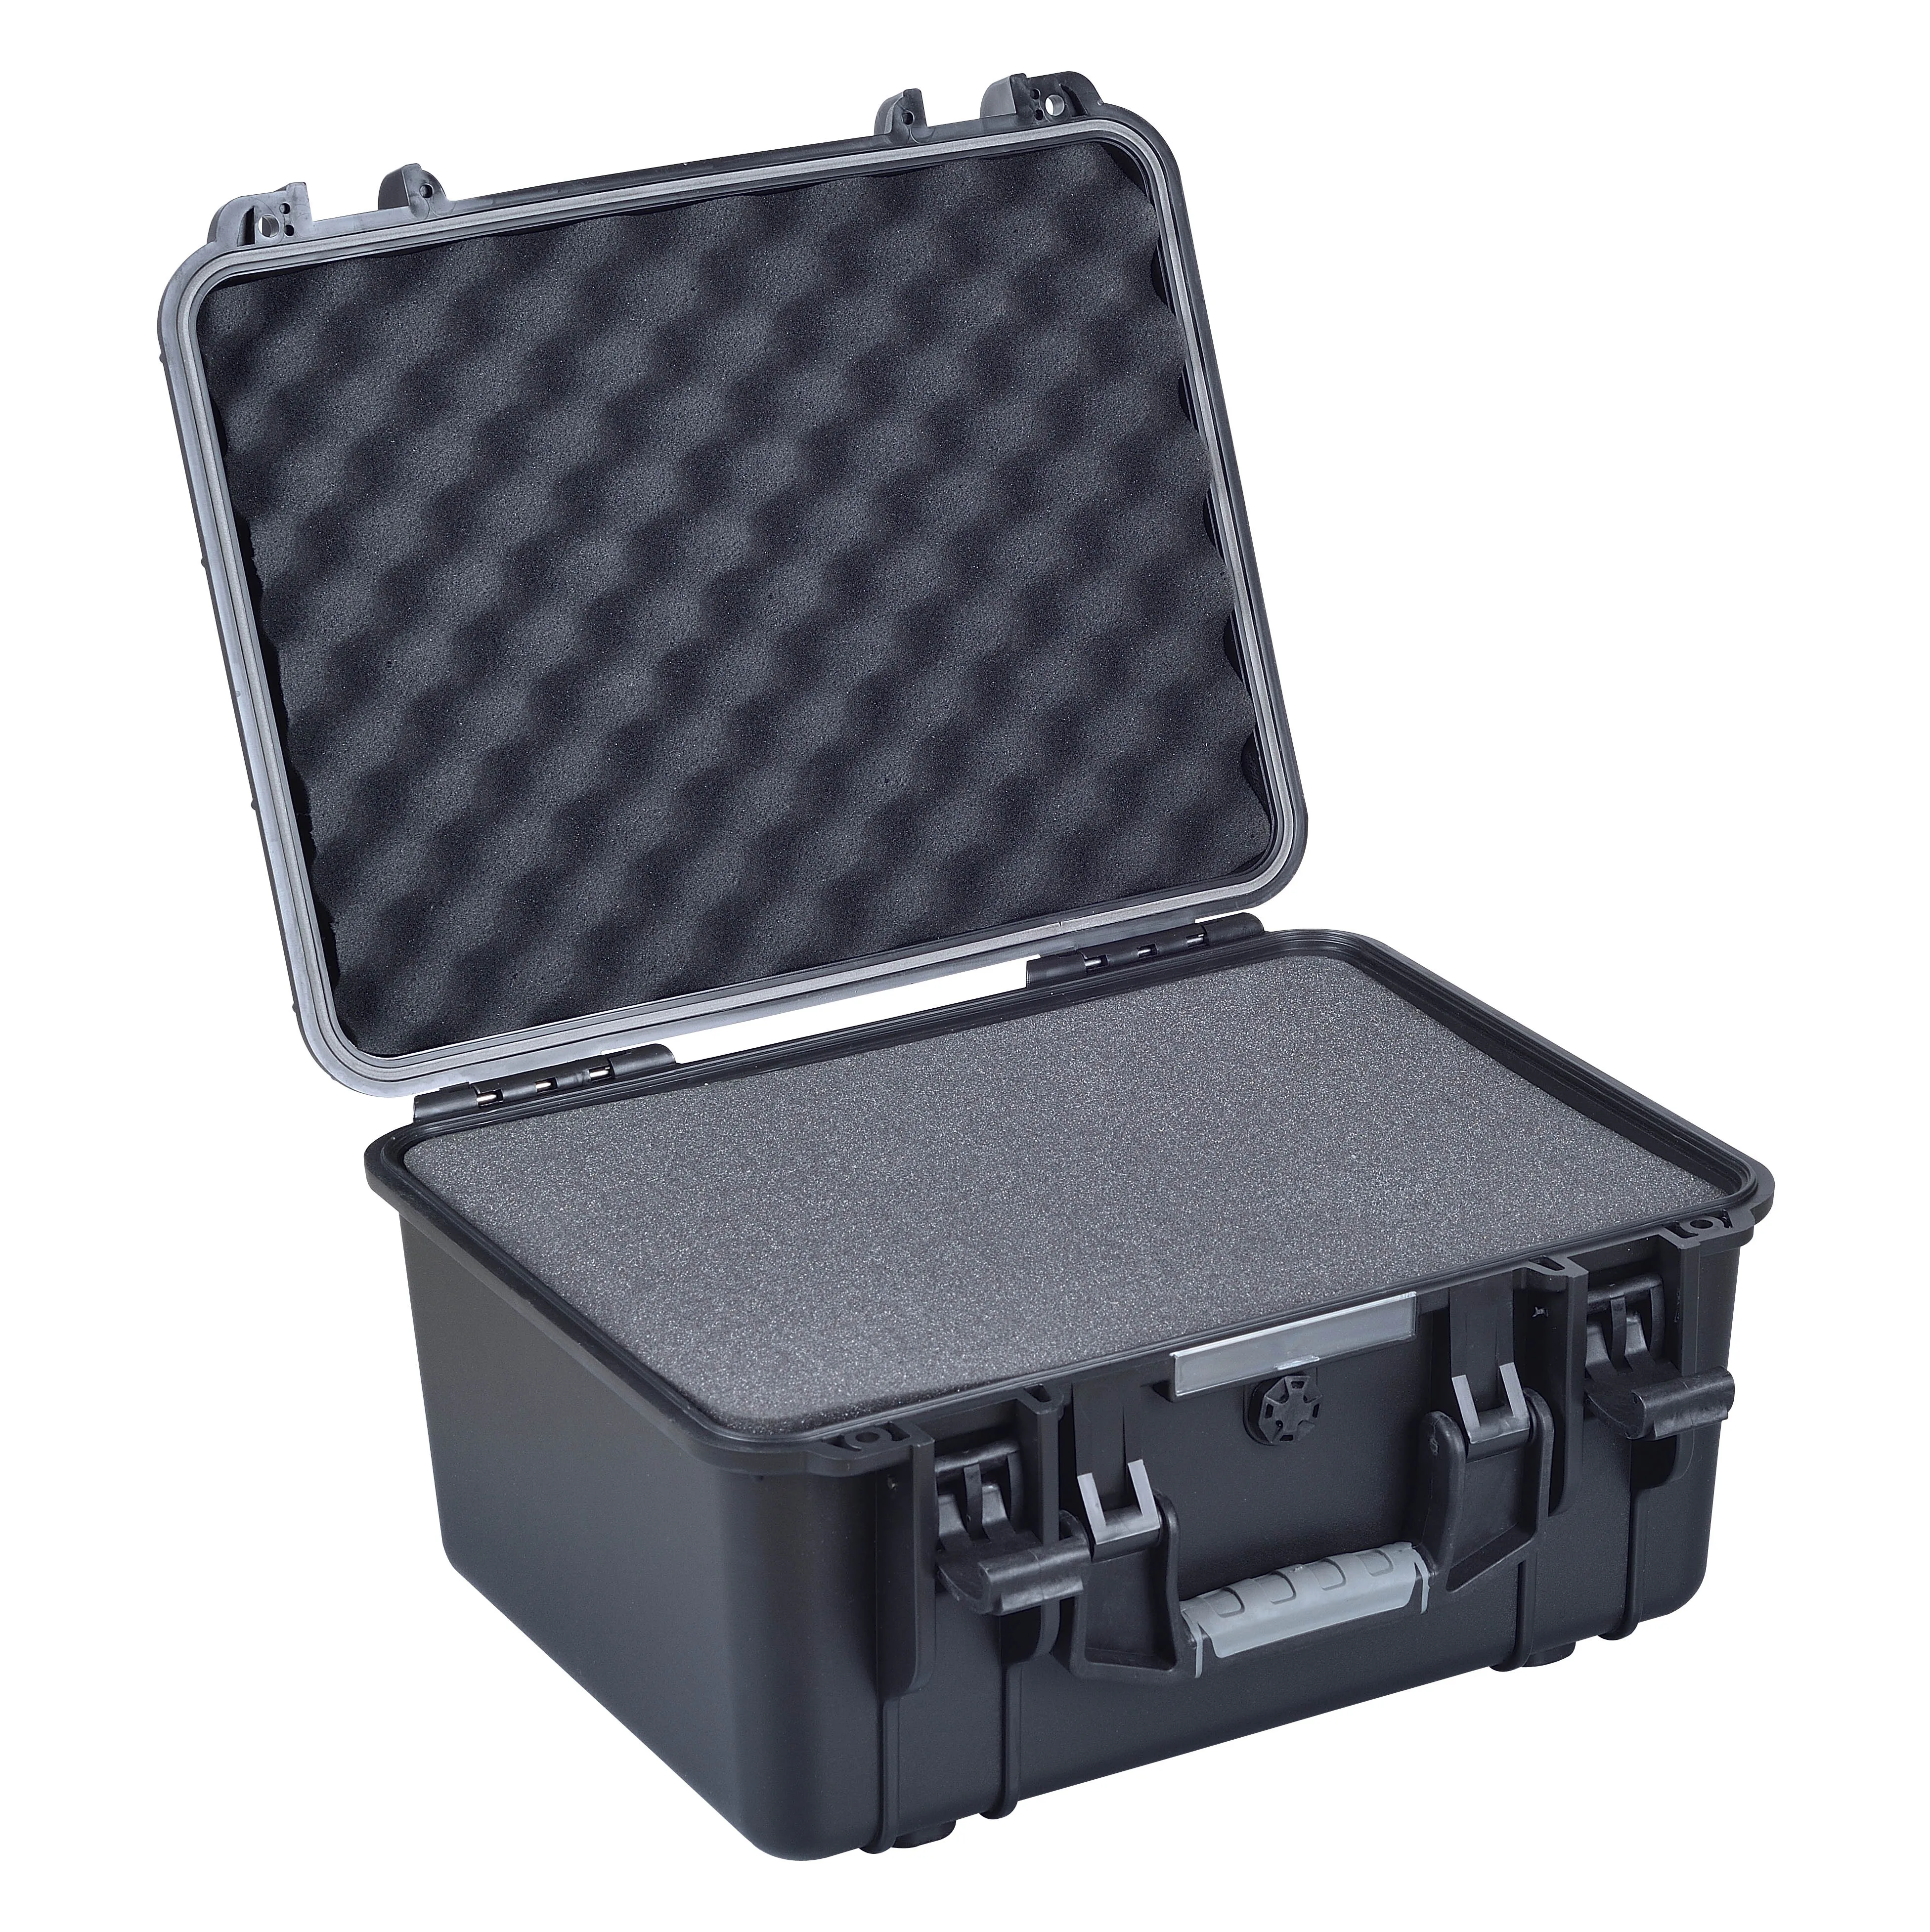 

OD 520*415*224 mm anti-low and high temperature hard plastic case with foam inside